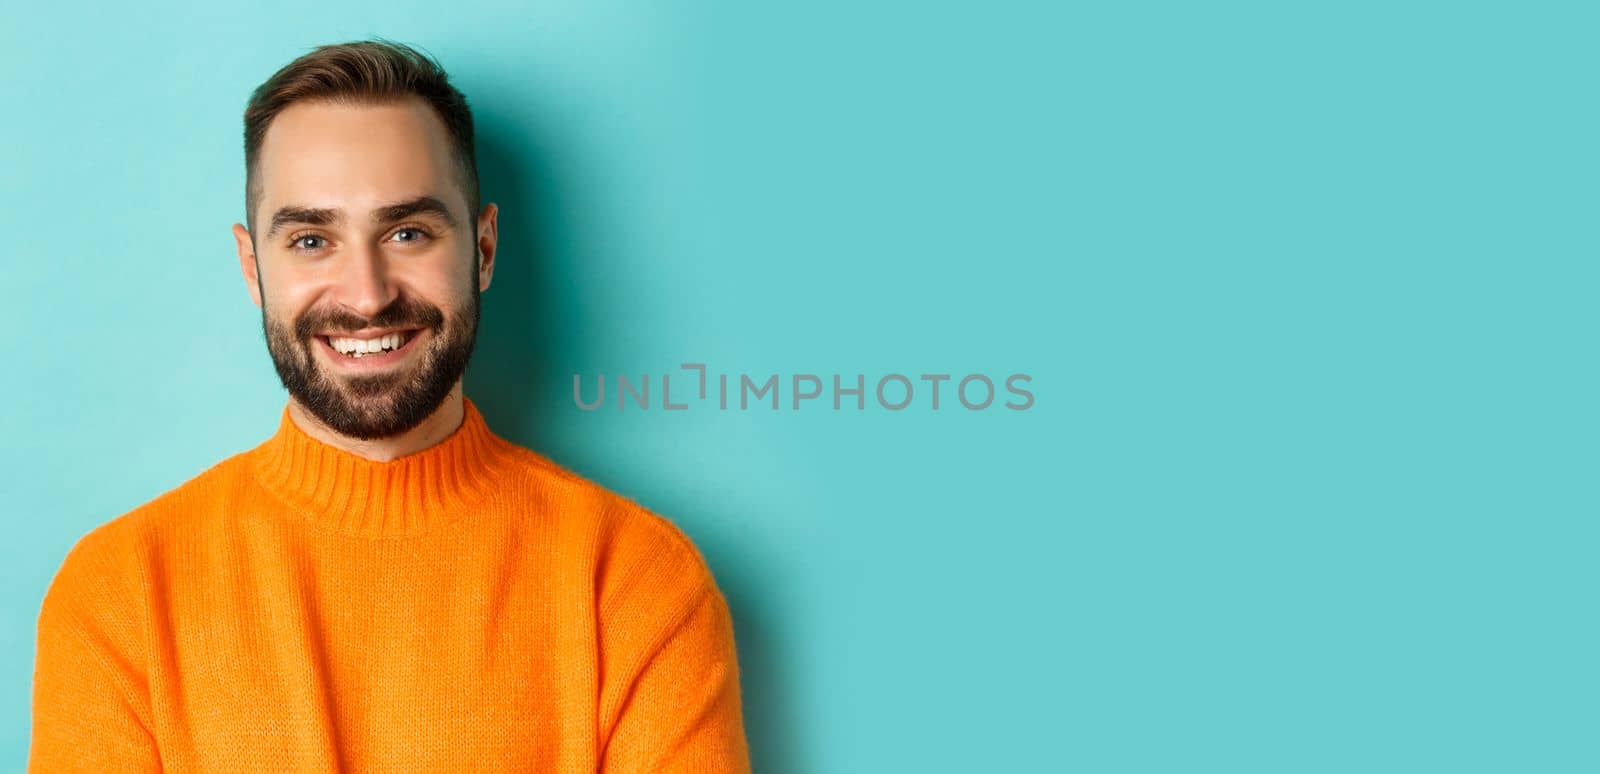 Close-up of handsome caucasian man smiling at camera, looking confident, wearing orange sweater, standing against turquoise background.